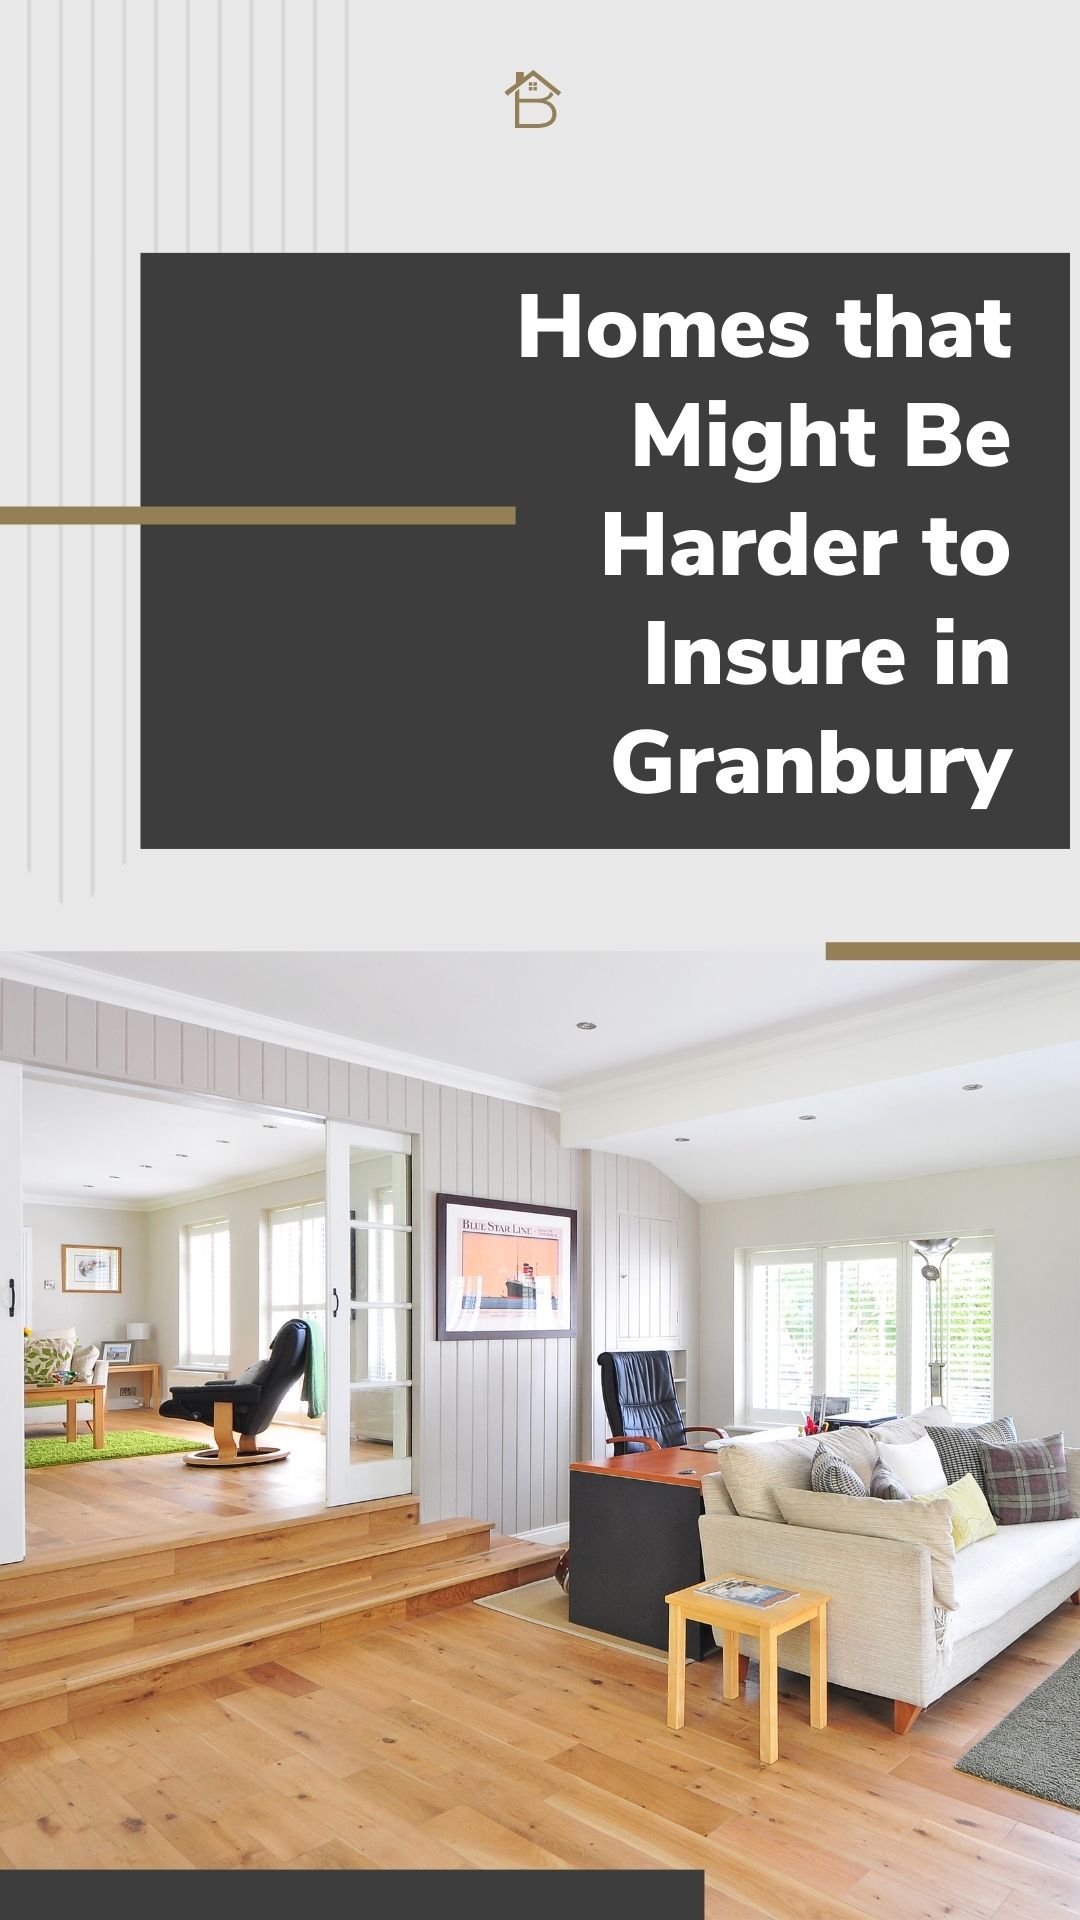 Homes that Might Be Harder to Insure in Granbury